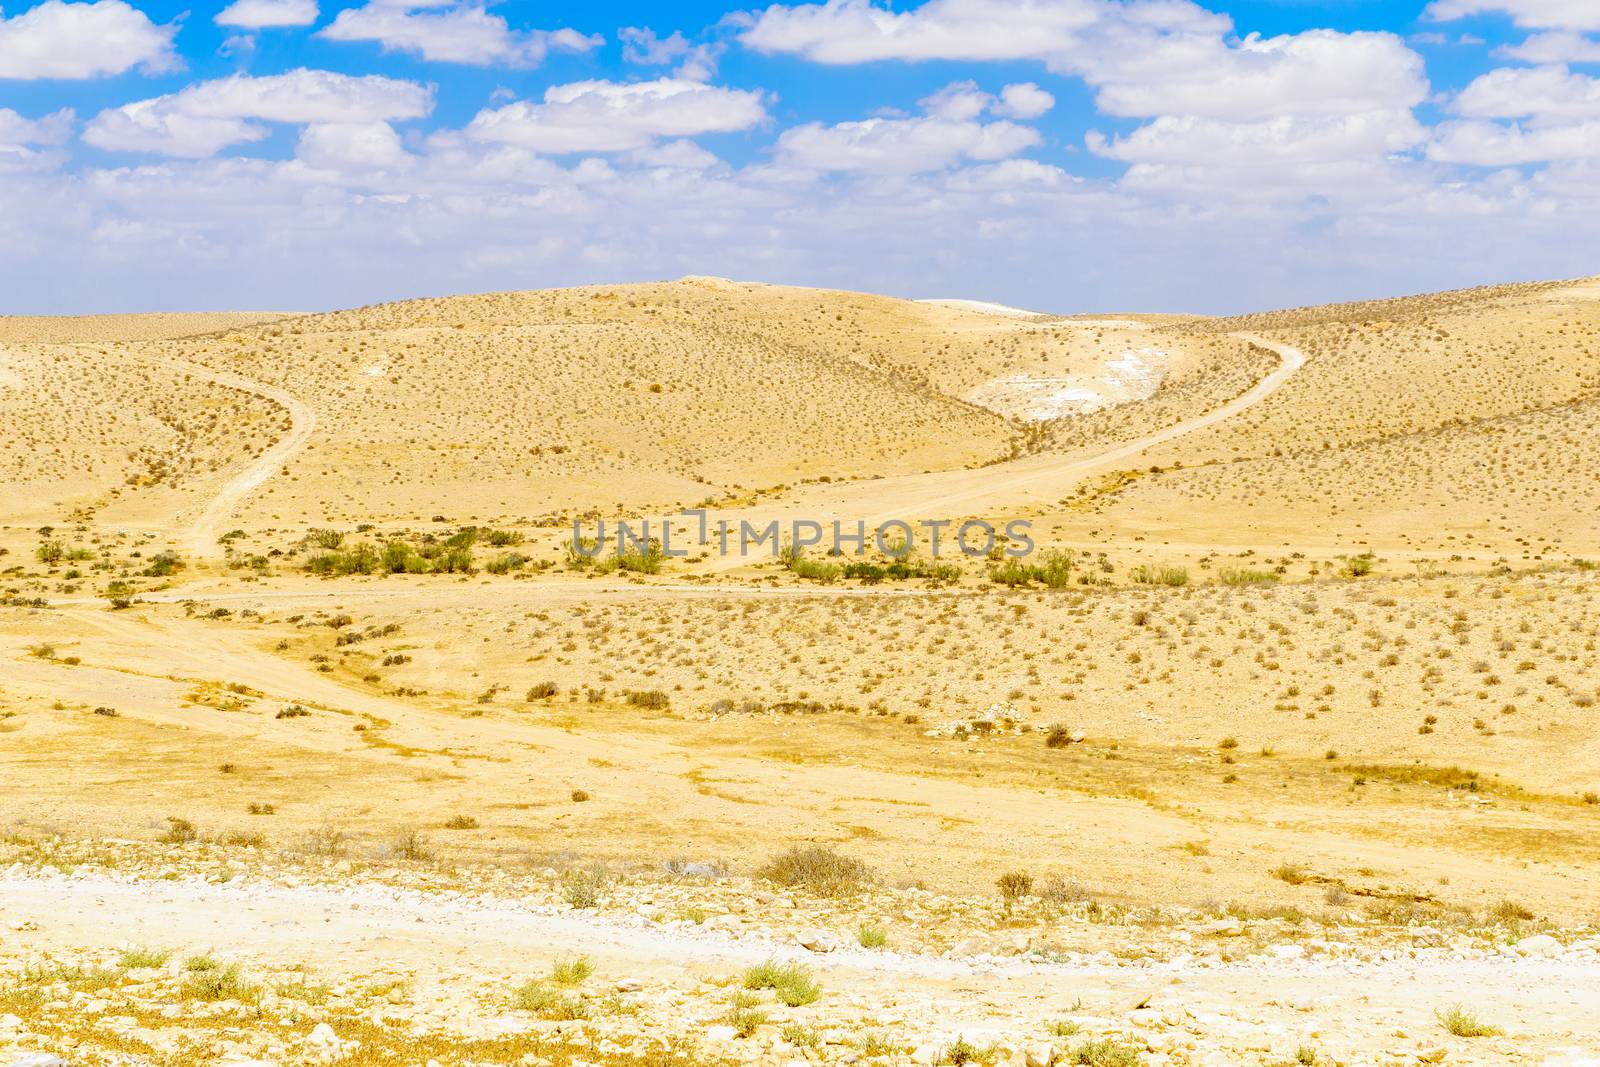 View of the Negev Desert, from Tali Lookout Point by RnDmS